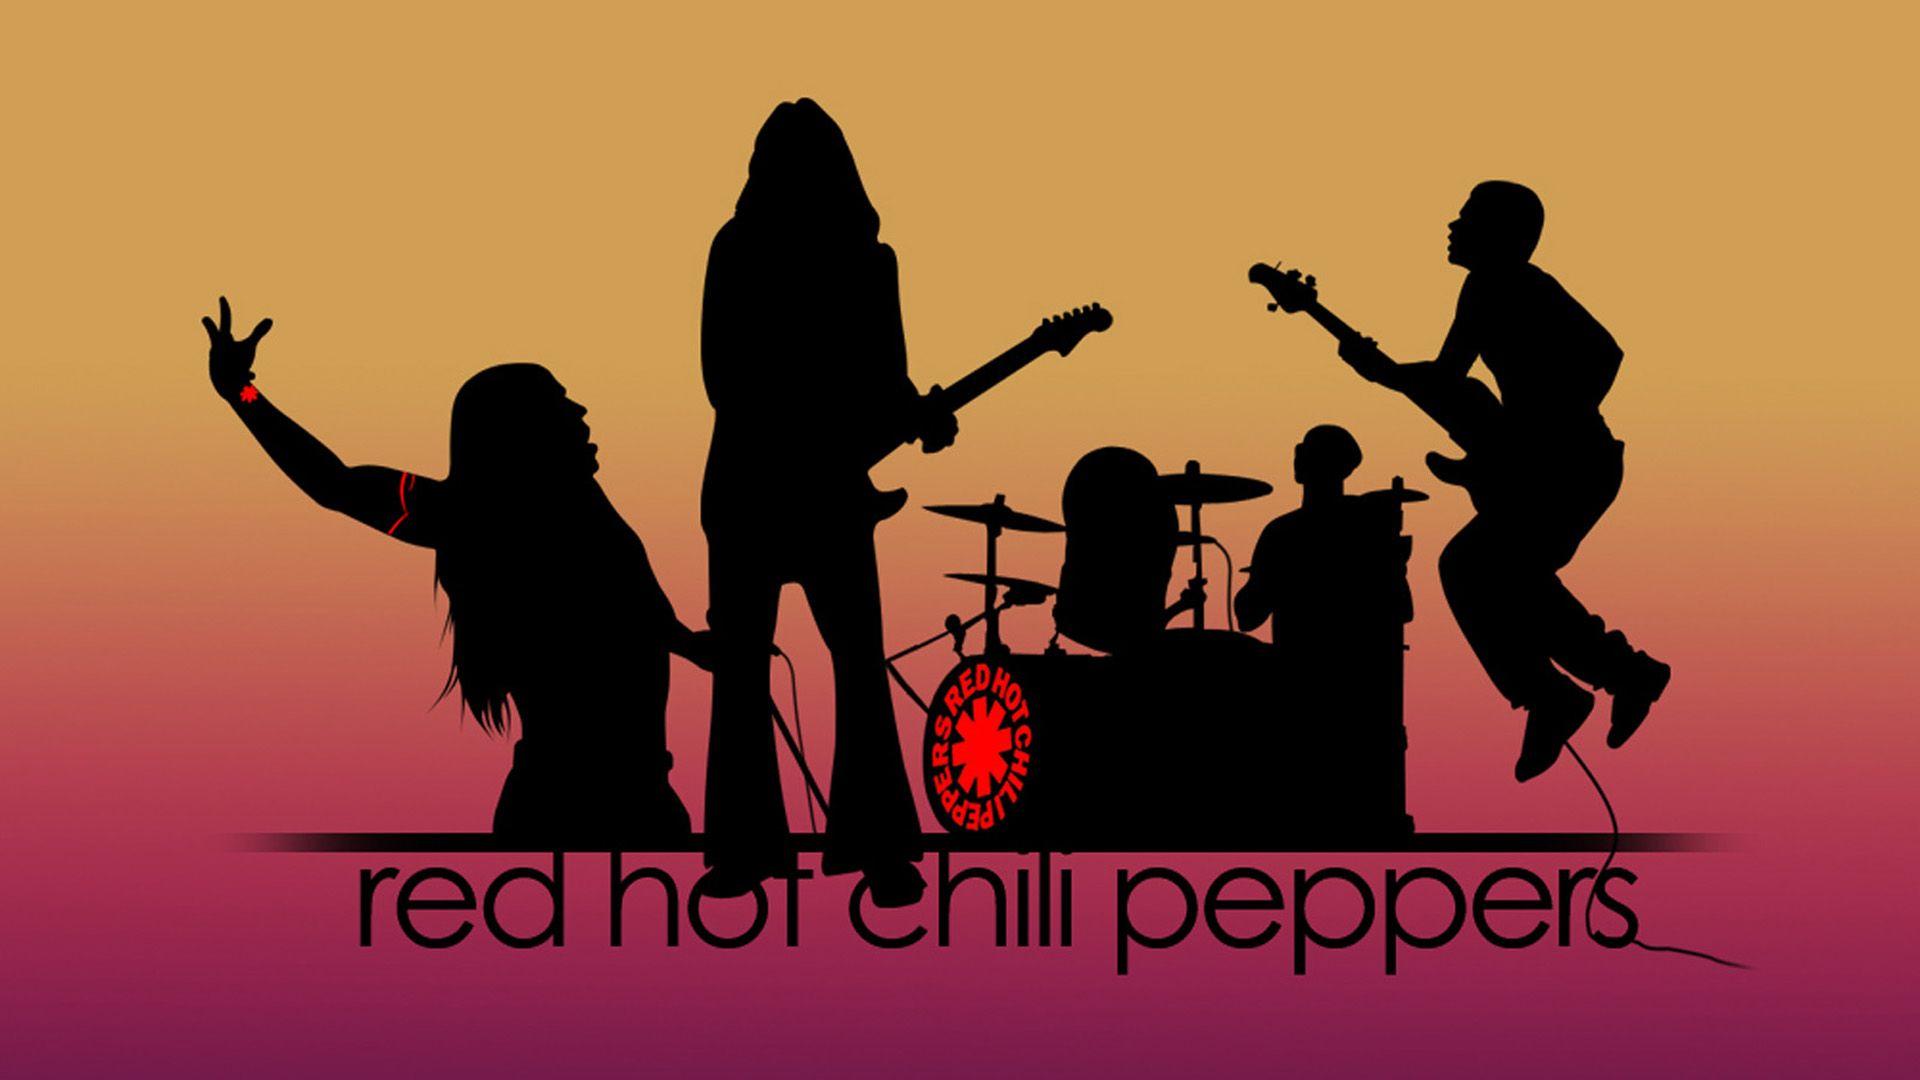 Red Hot Chili Peppers by me801 on DeviantArt